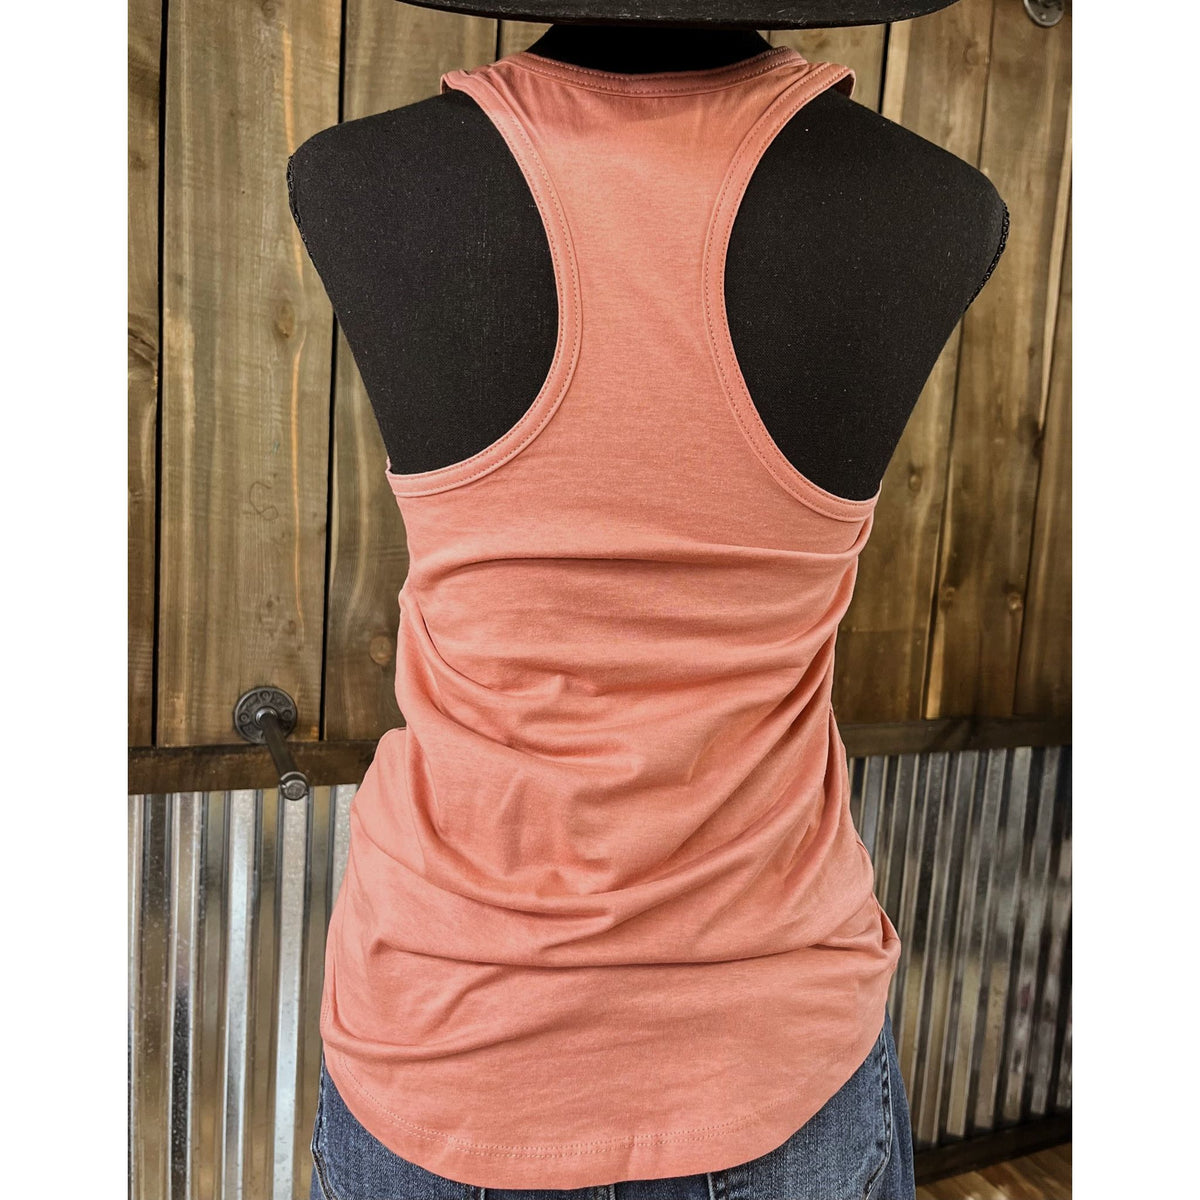 Boot stitch racer back tank-Graphic Tees-[Womens_Boutique]-[NFR]-[Rodeo_Fashion]-[Western_Style]-Calamity's LLC